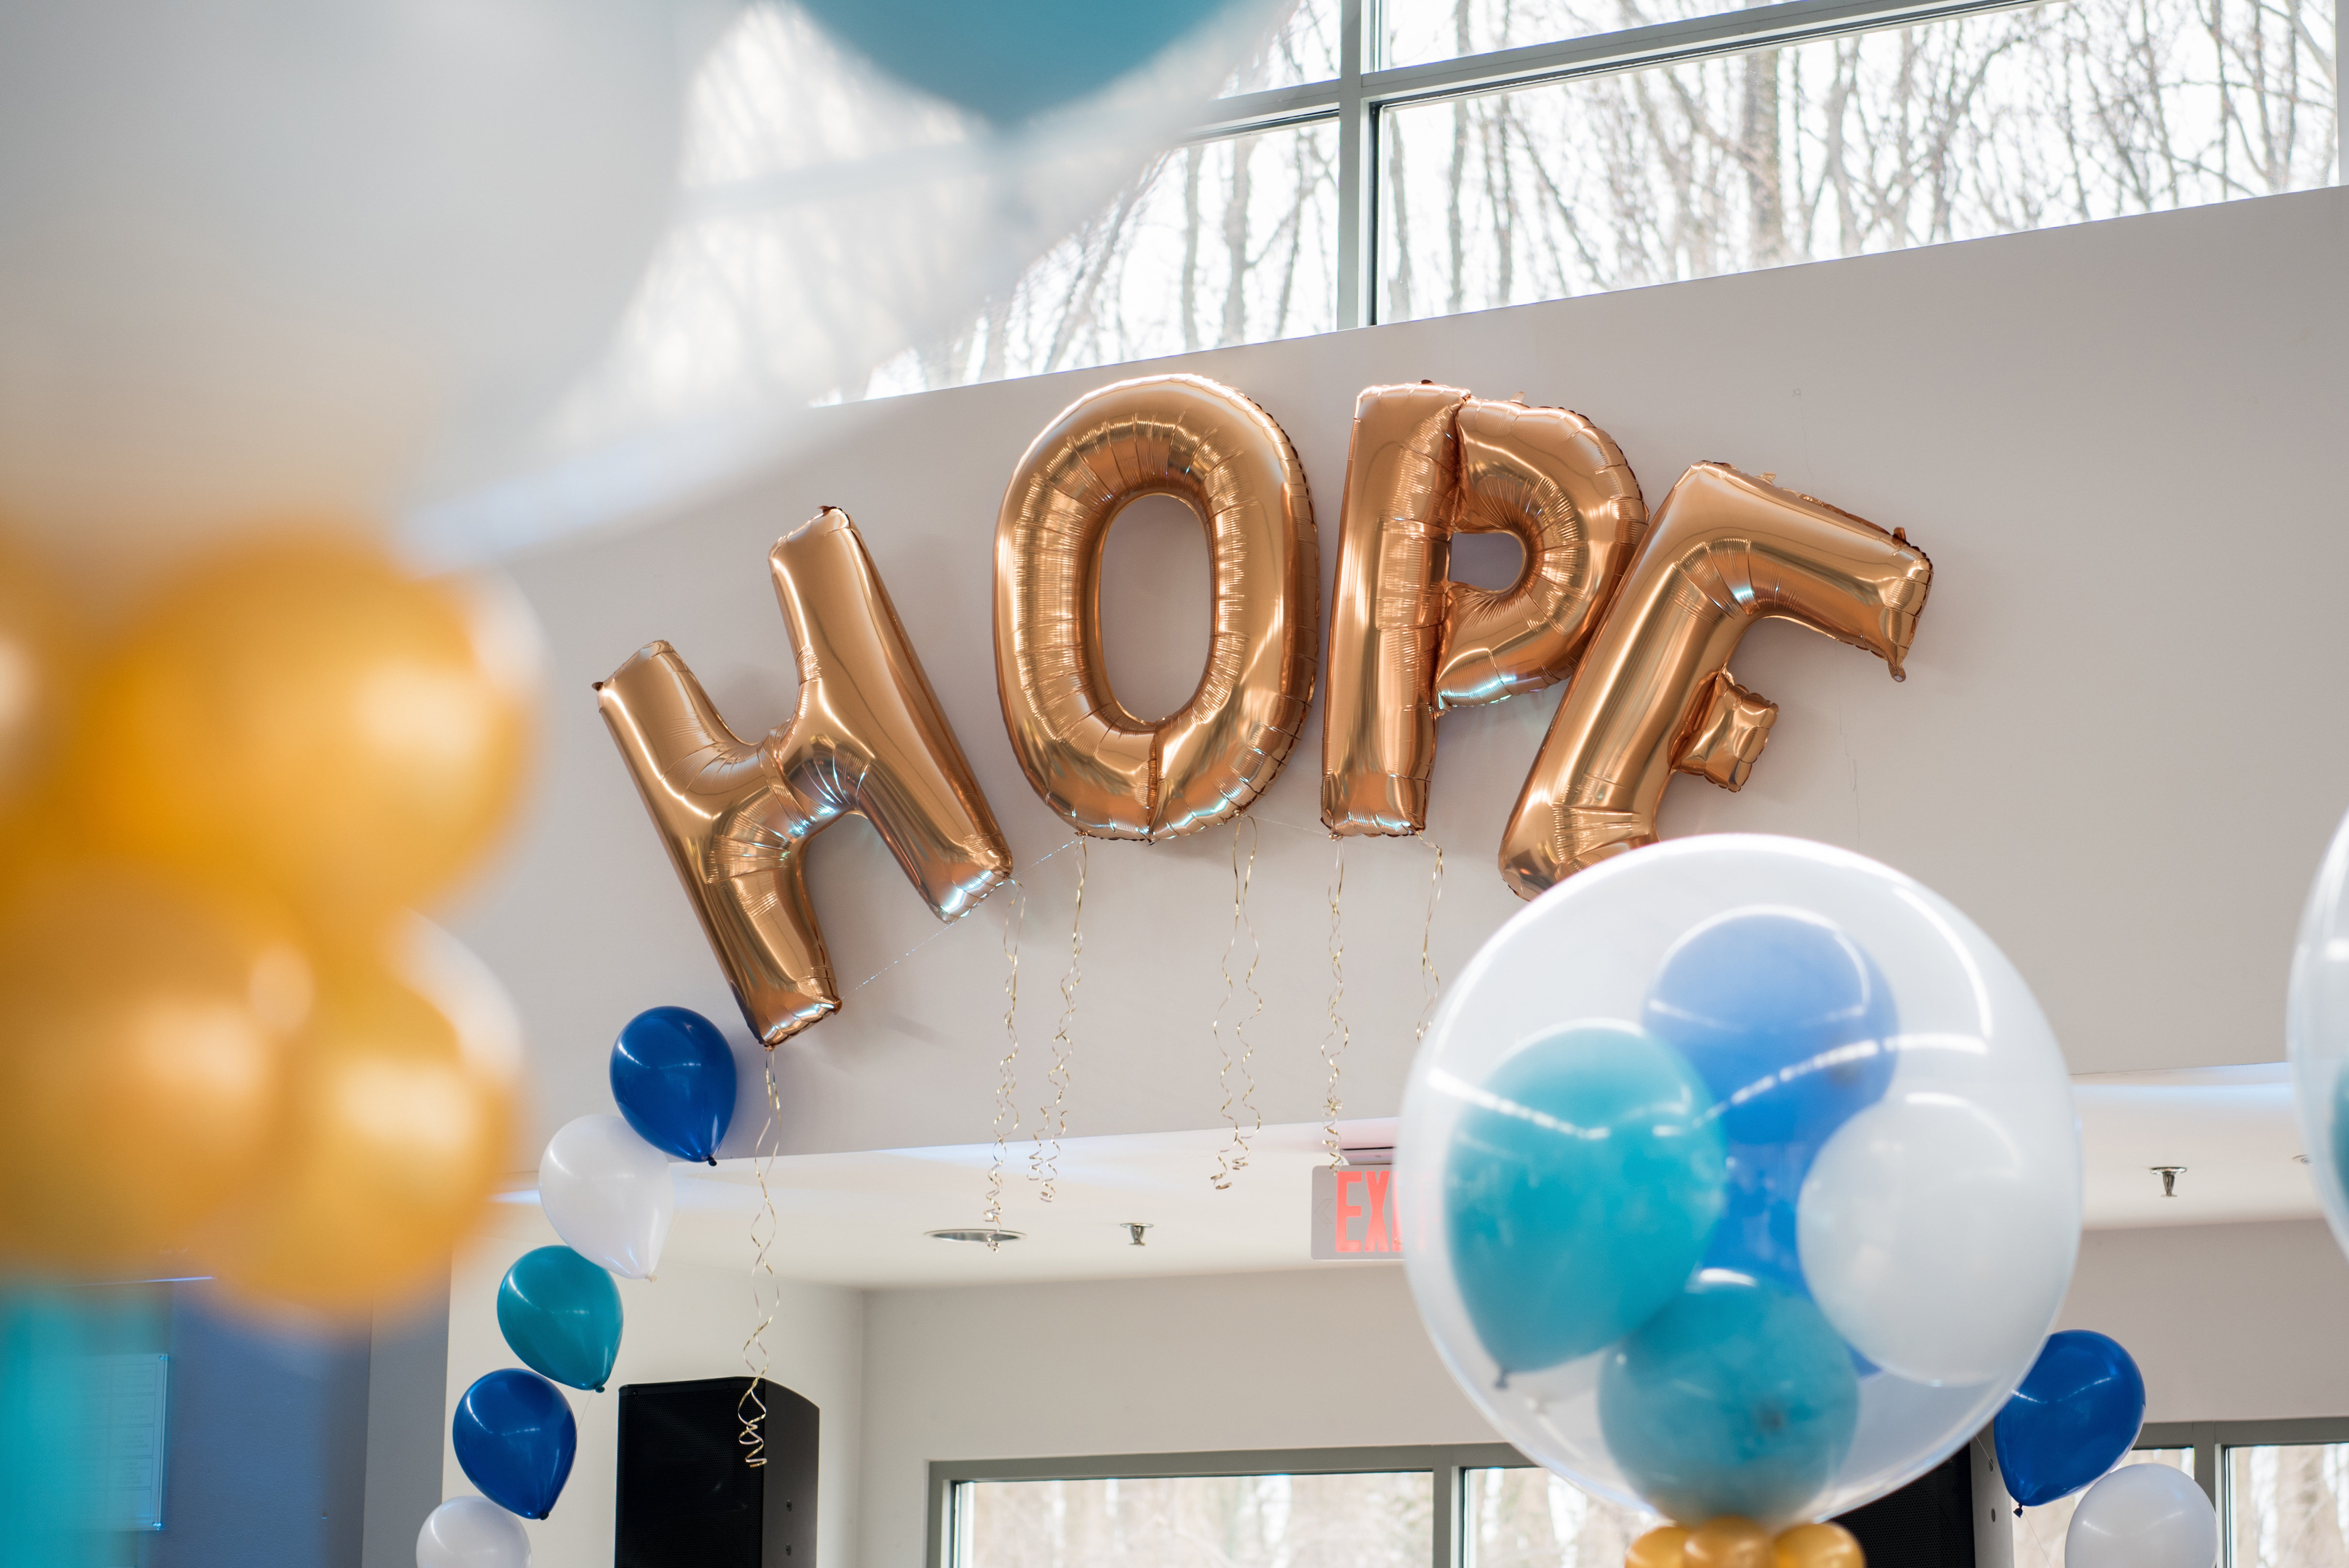 Balloon arch at Hope's teal and blue Bat Mitzvah party at Temple Rodef Shalom in Falls Church, Virginia with balloons, a mirror photo booth and chevron. | Pop Color Events | Adding a Pop of Color to Bar & Bat Mitzvahs in DC, MD & VA | Photo by Greg Land Photography